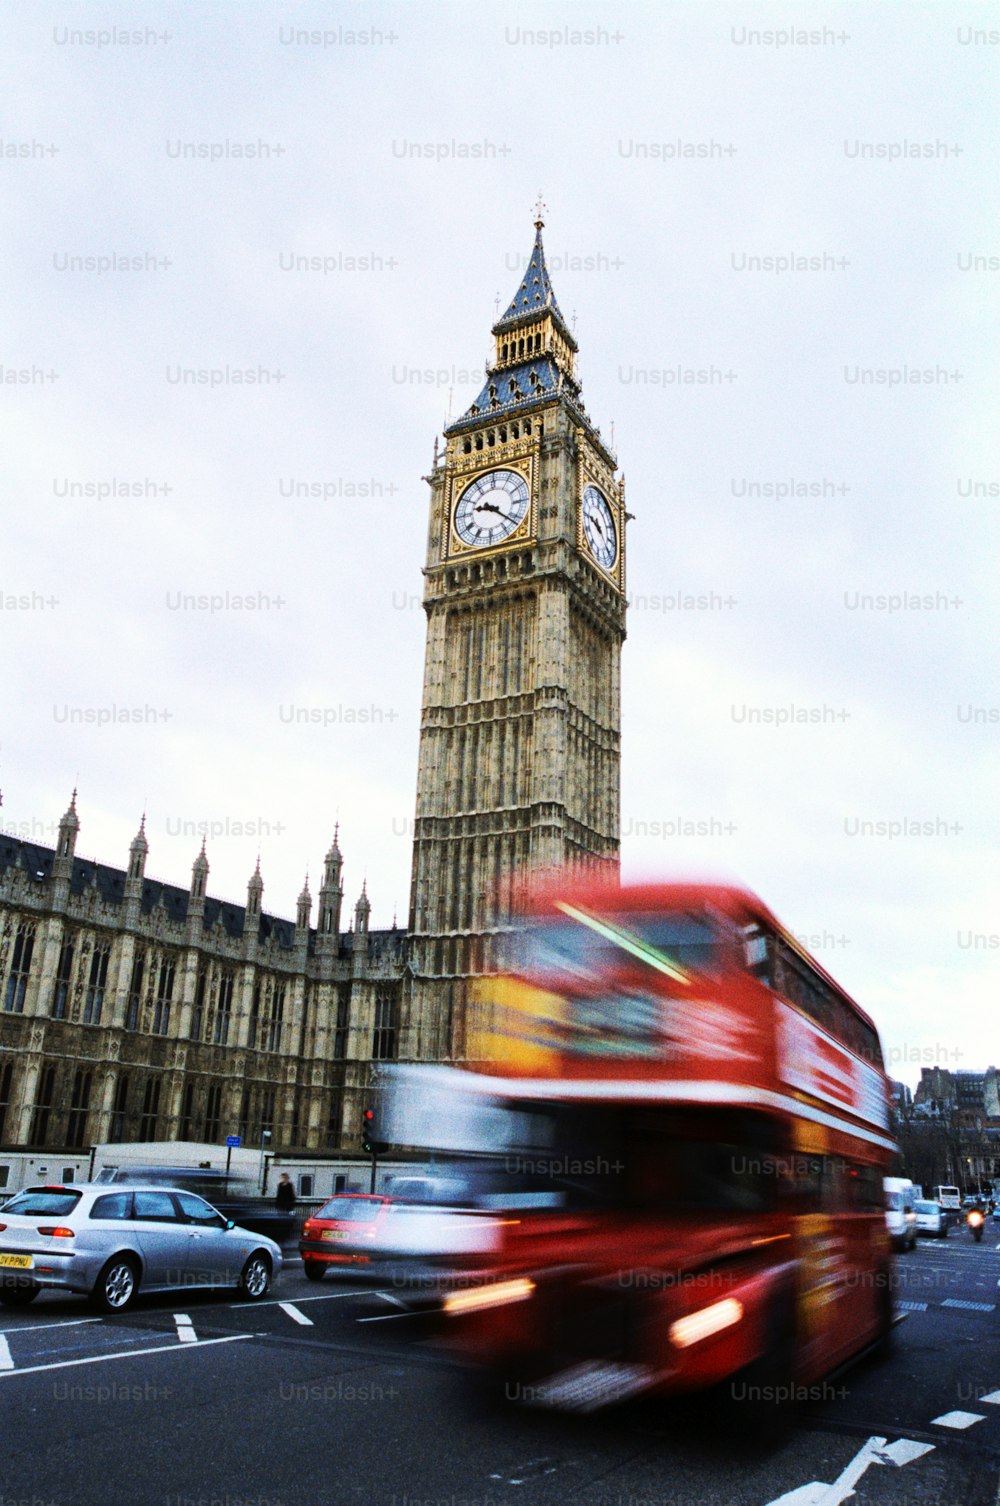 a red double decker bus driving past big ben